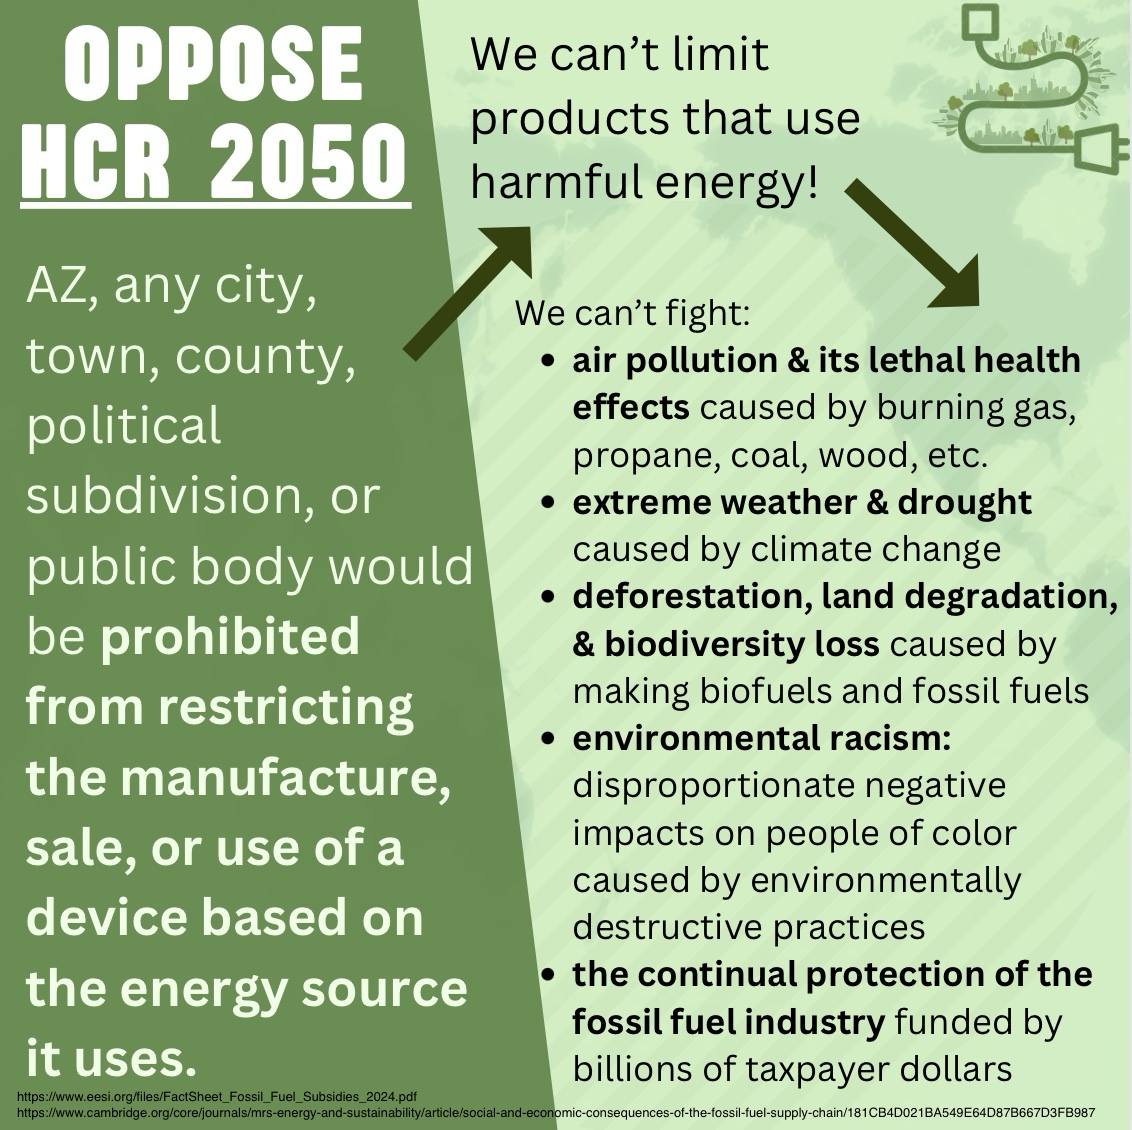 Oppose HCR2050 AZ, any city, town, county is prohibited from restricting any device based on energy source